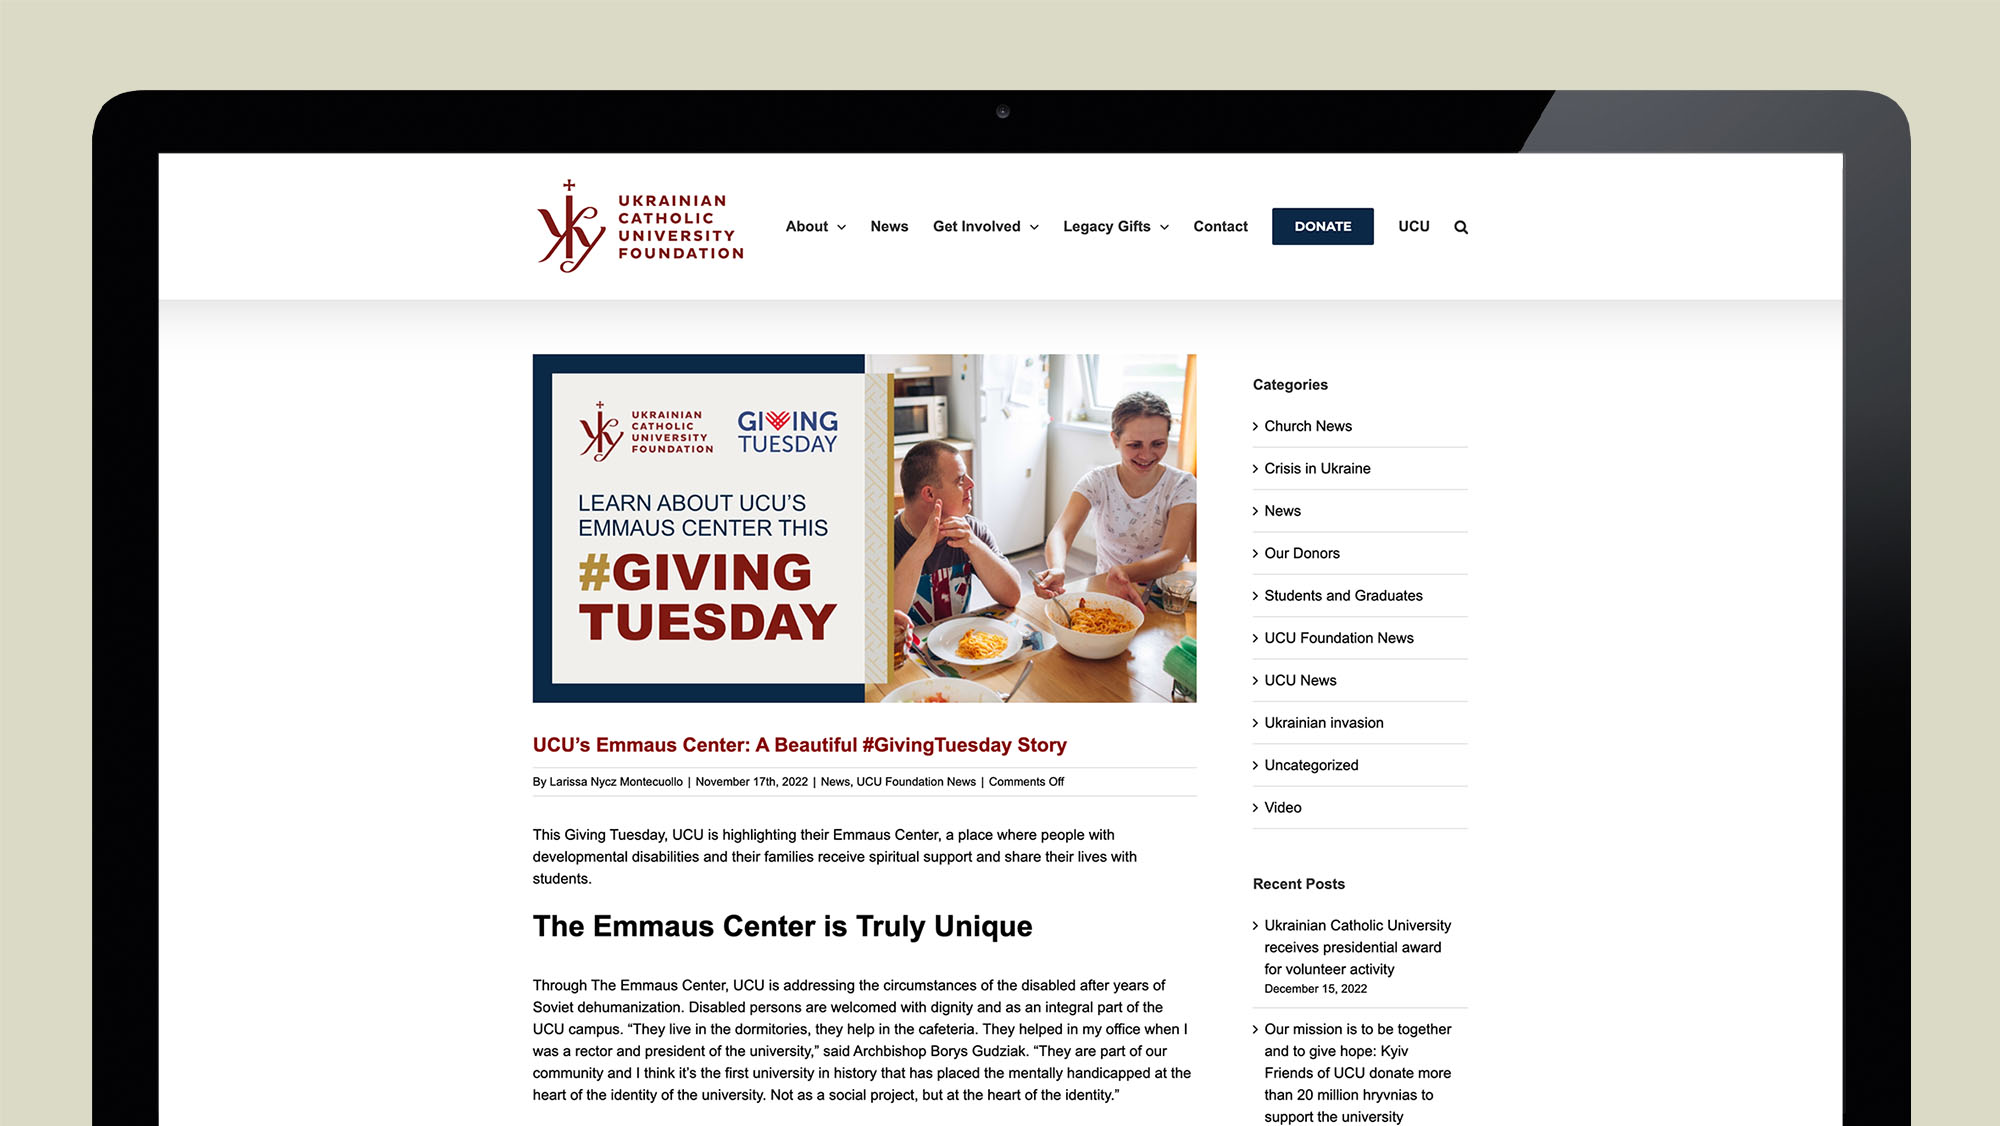 A Giving Tuesday marketing campaign blog post describing why the Emmaus Center at UCU is the focus for fundraising.